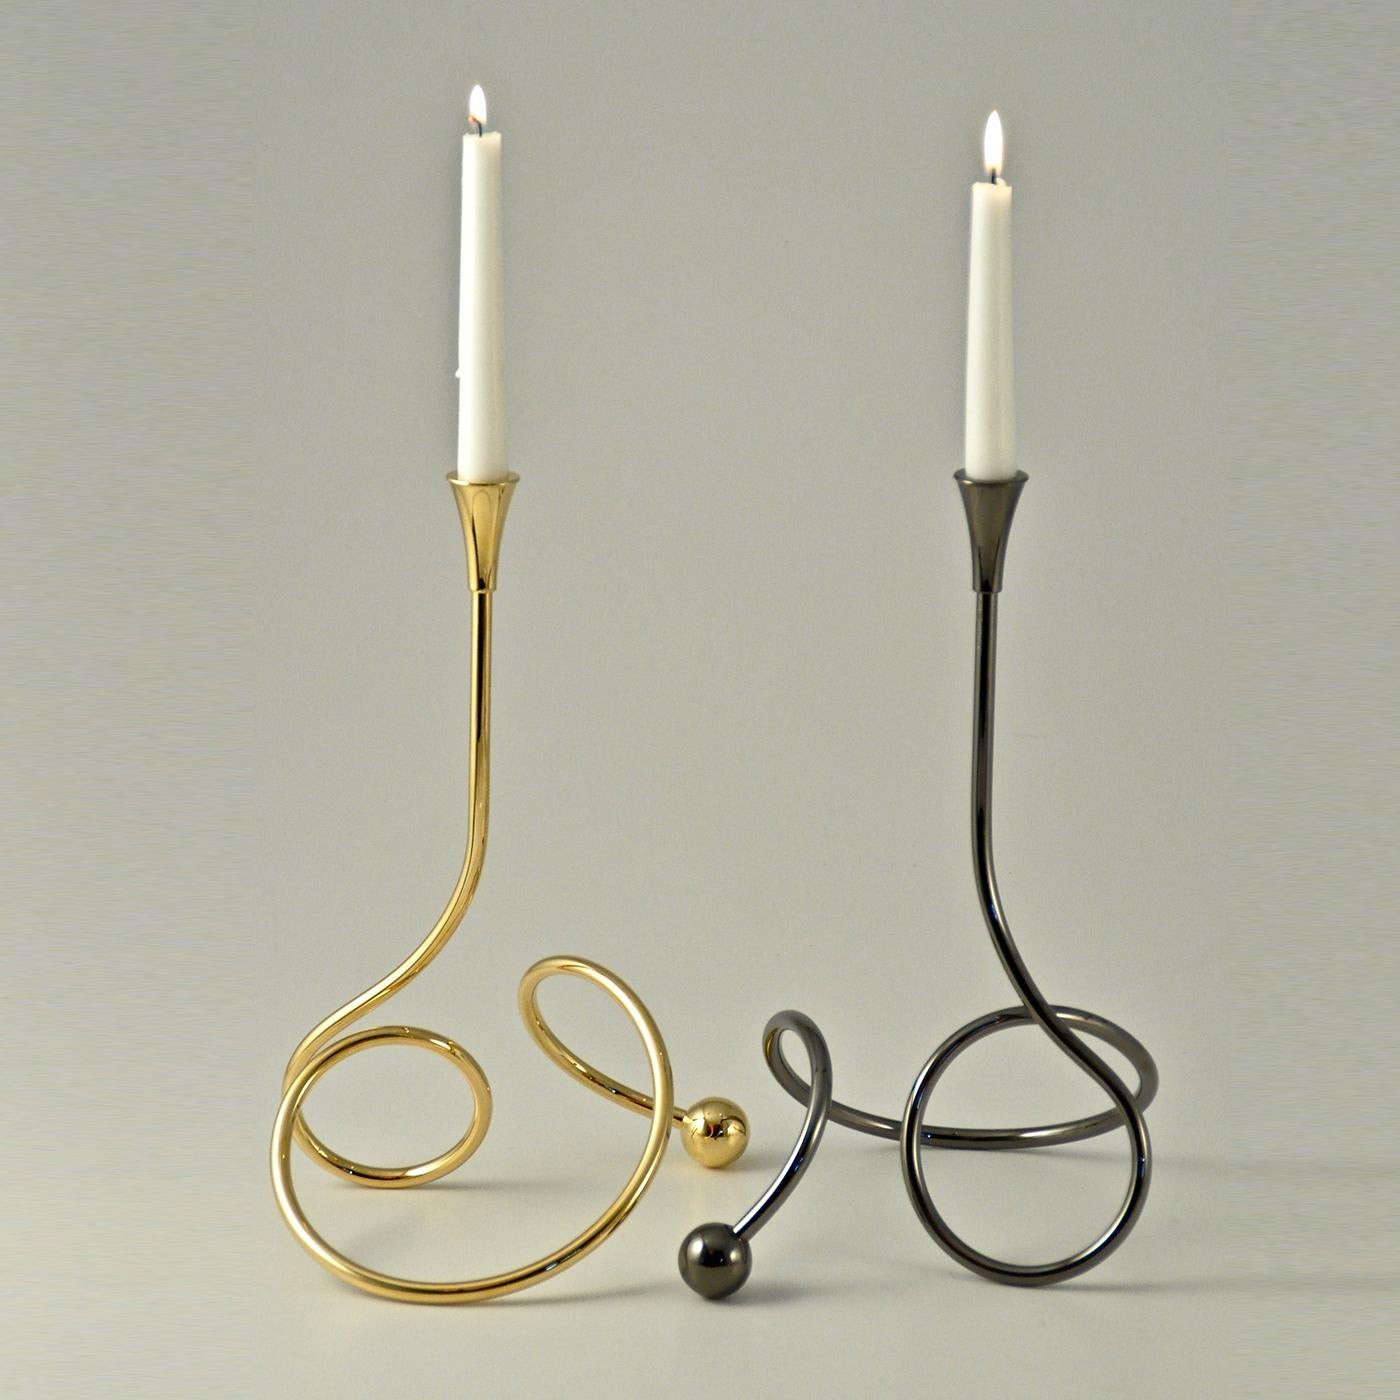 Superb individual handmade candleholders with an enveloping base of curved metal. The perfect arrangement is a playful composition of three intertwined pieces, plated with pure silver, yellow gold, and titanium respectively.